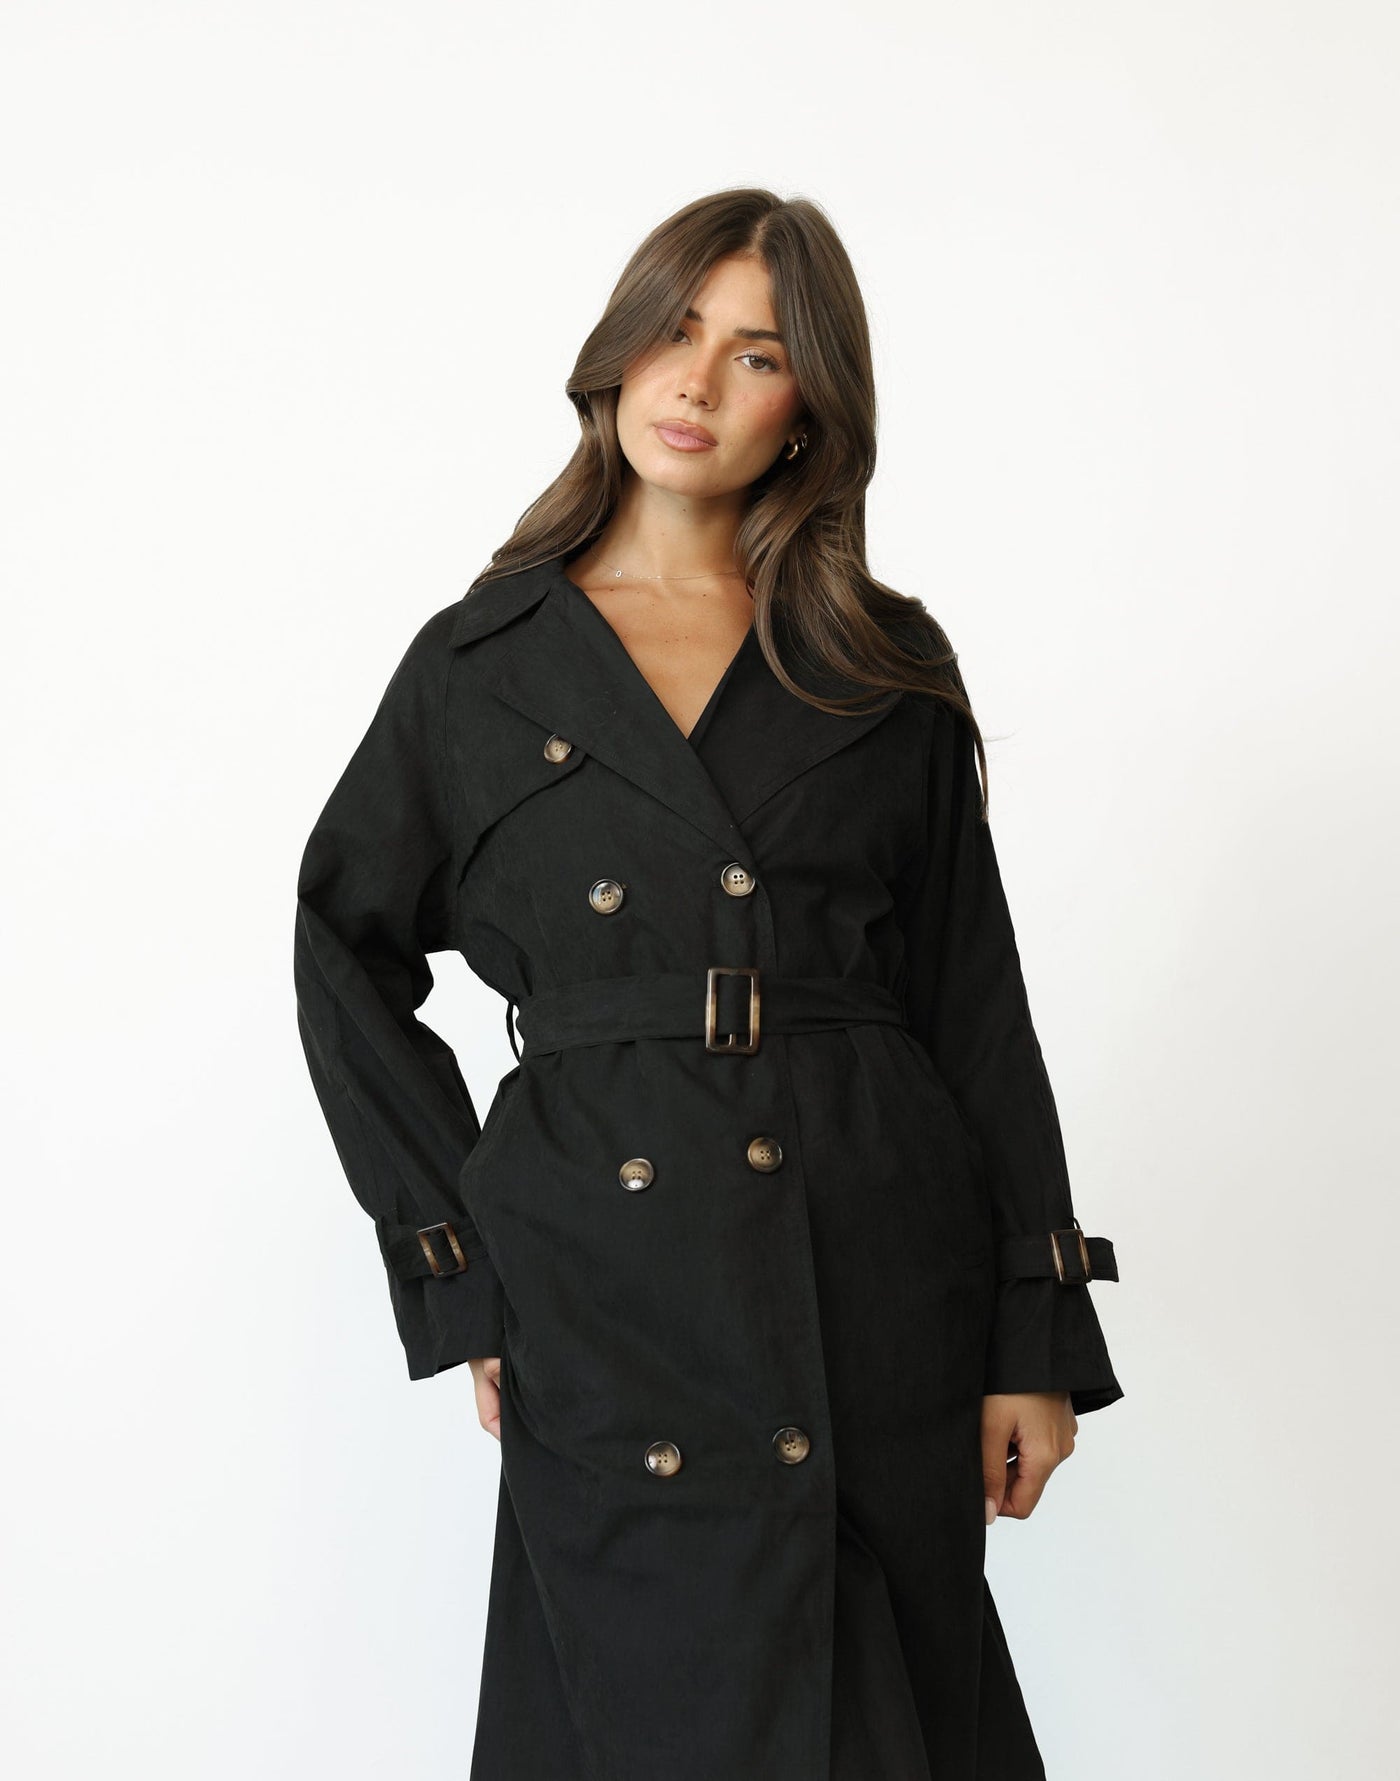 Izaiah Trench Coat (Black) - Full Length Trench Coat with Waist Tie - Women's Outerwear - Charcoal Clothing